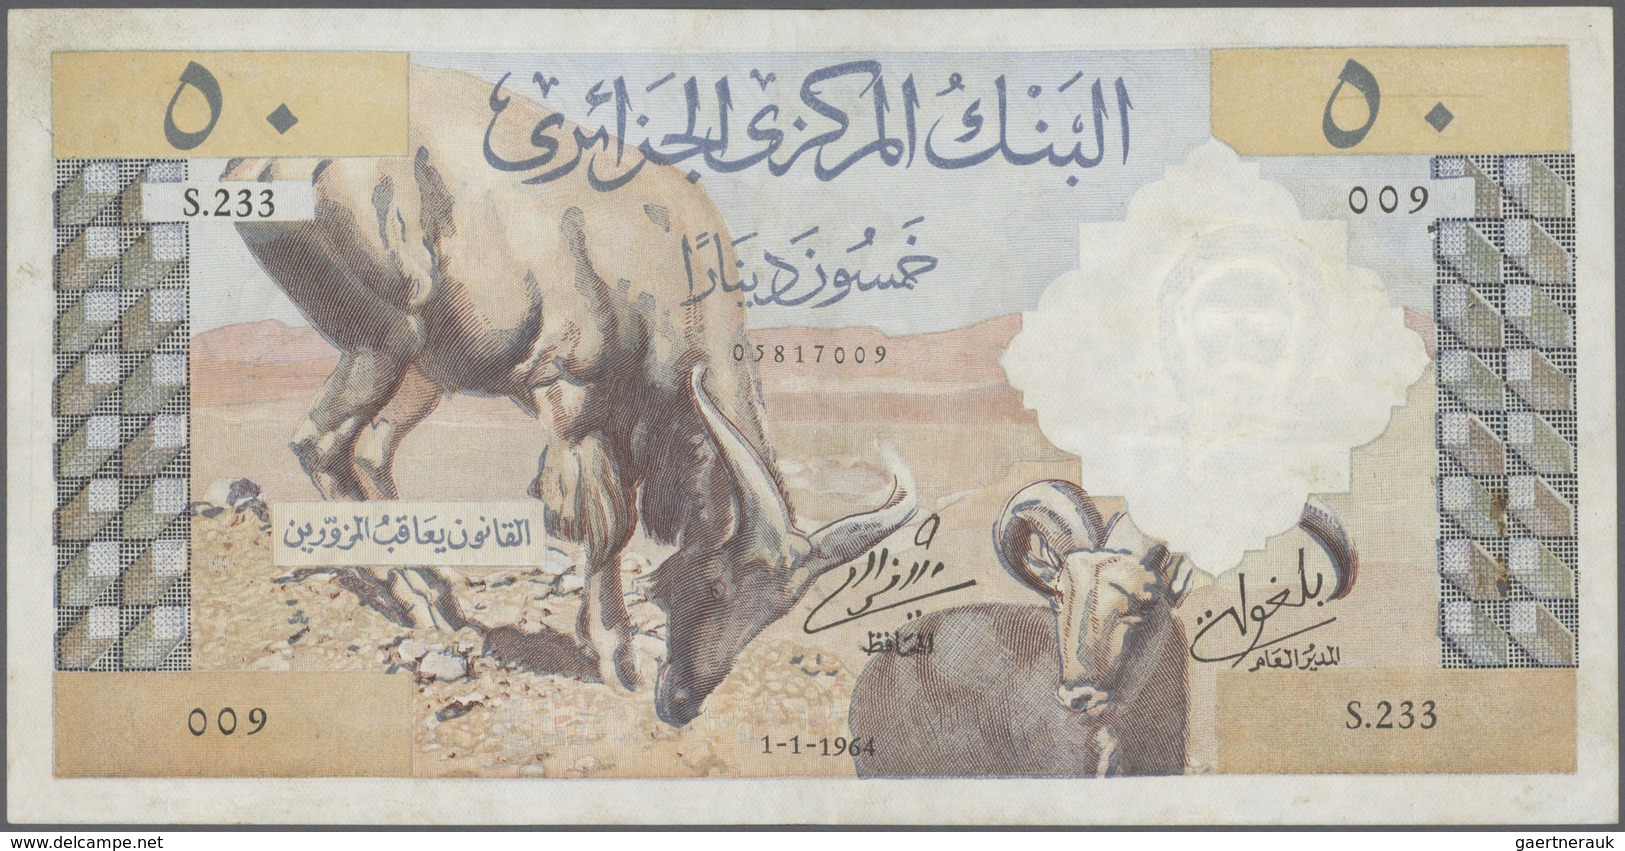 Algeria / Algerien: Set Of 2 Notes 50 Dinars 1964 P. 124, Both In Lightly Used Condition, Not Washed - Algerije